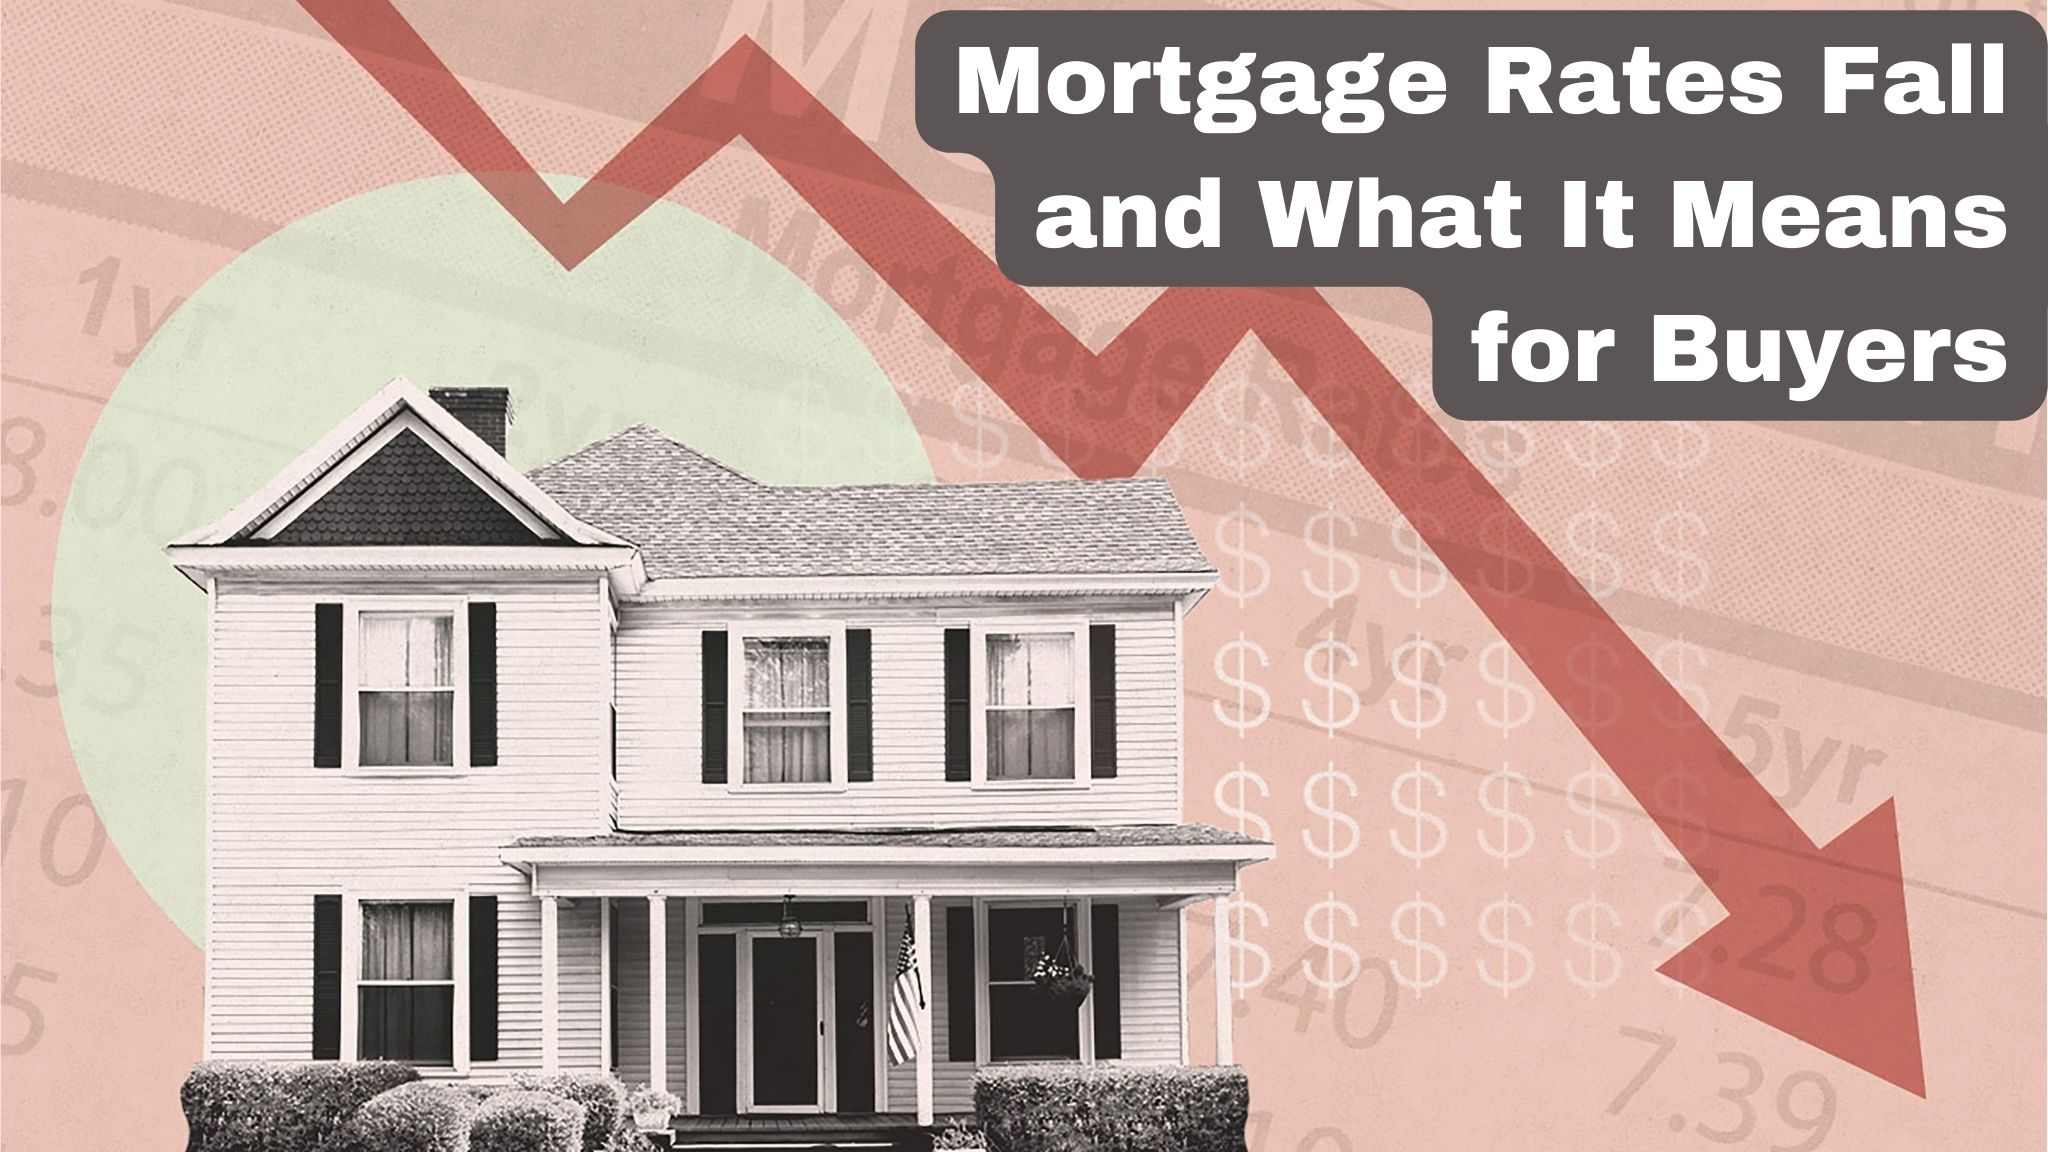 Mortgage Rates Fall and What It Means for Buyers